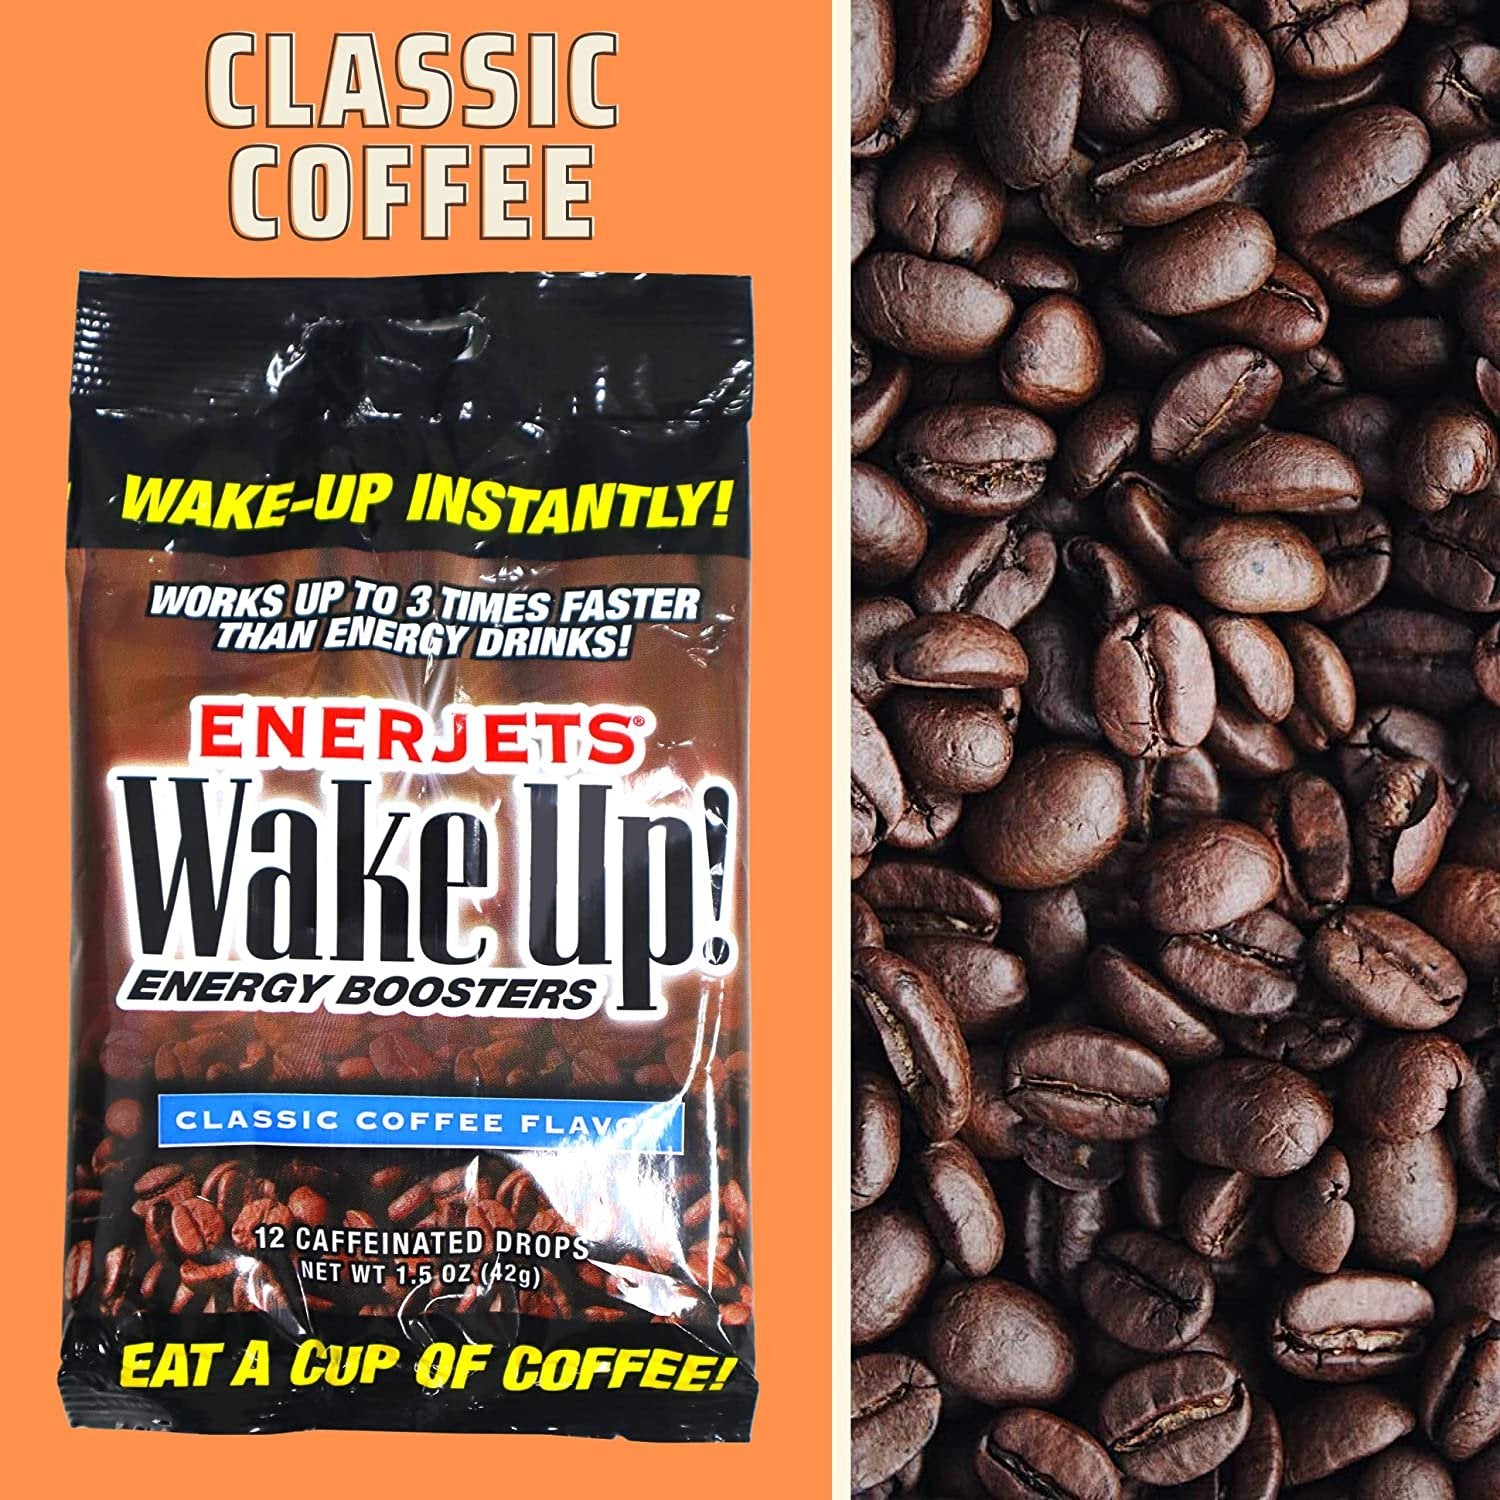 Enerjets Wake Up Energy Booster Caffeinated Drops - Instant Coffee Energy Supplements - Classic Coffee Flavor - Pack of 12, 12 Drops Per Package with Worldwide Nutrition Multi Purpose Key Chain